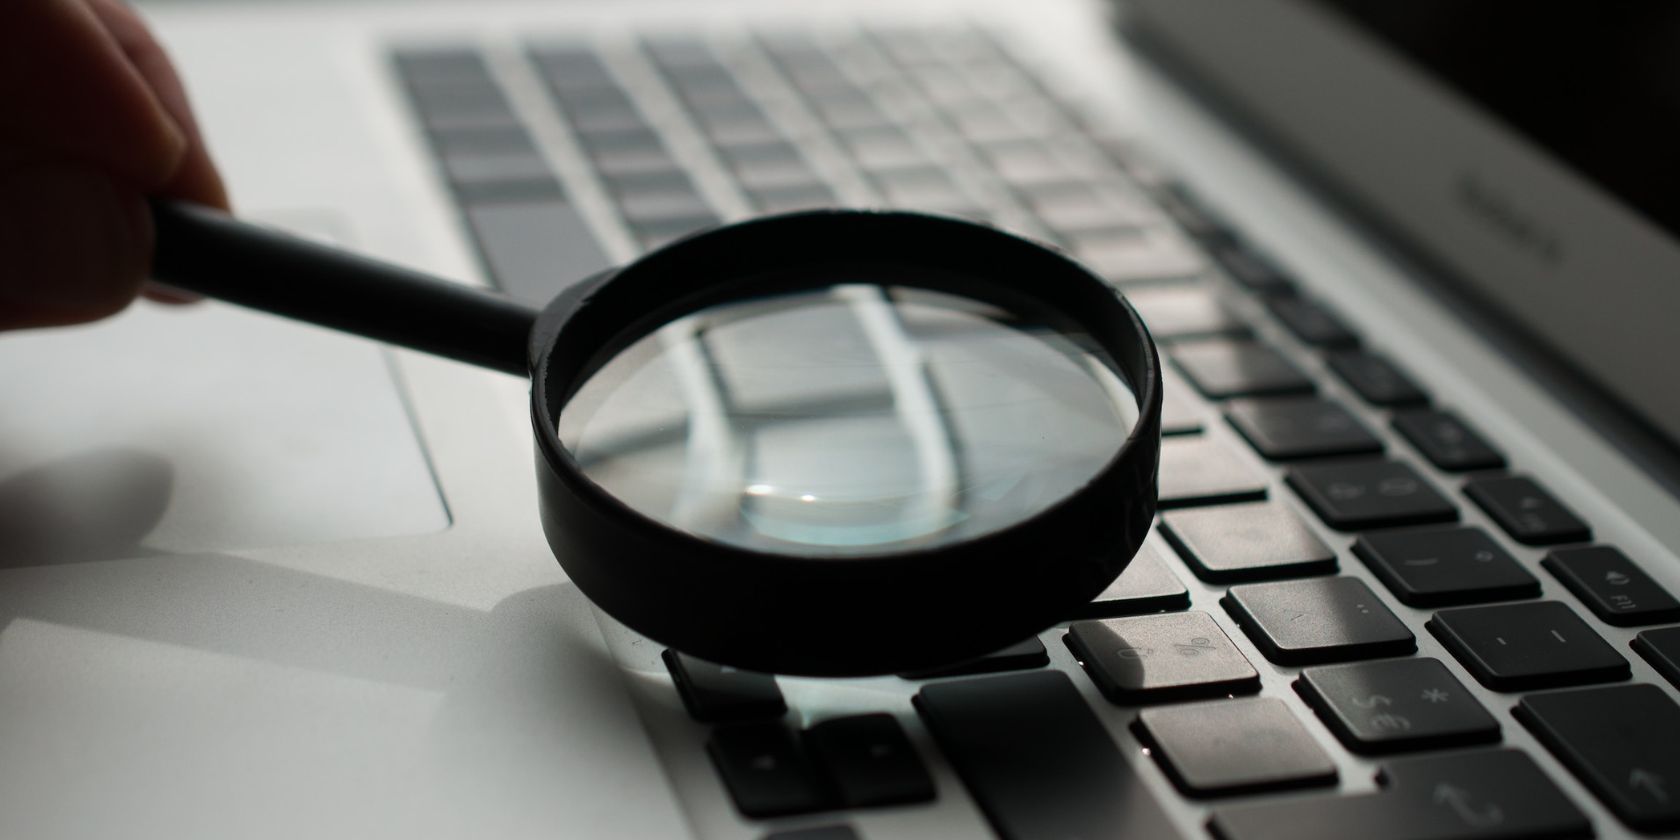 image of magnifying glass above laptop keyboard